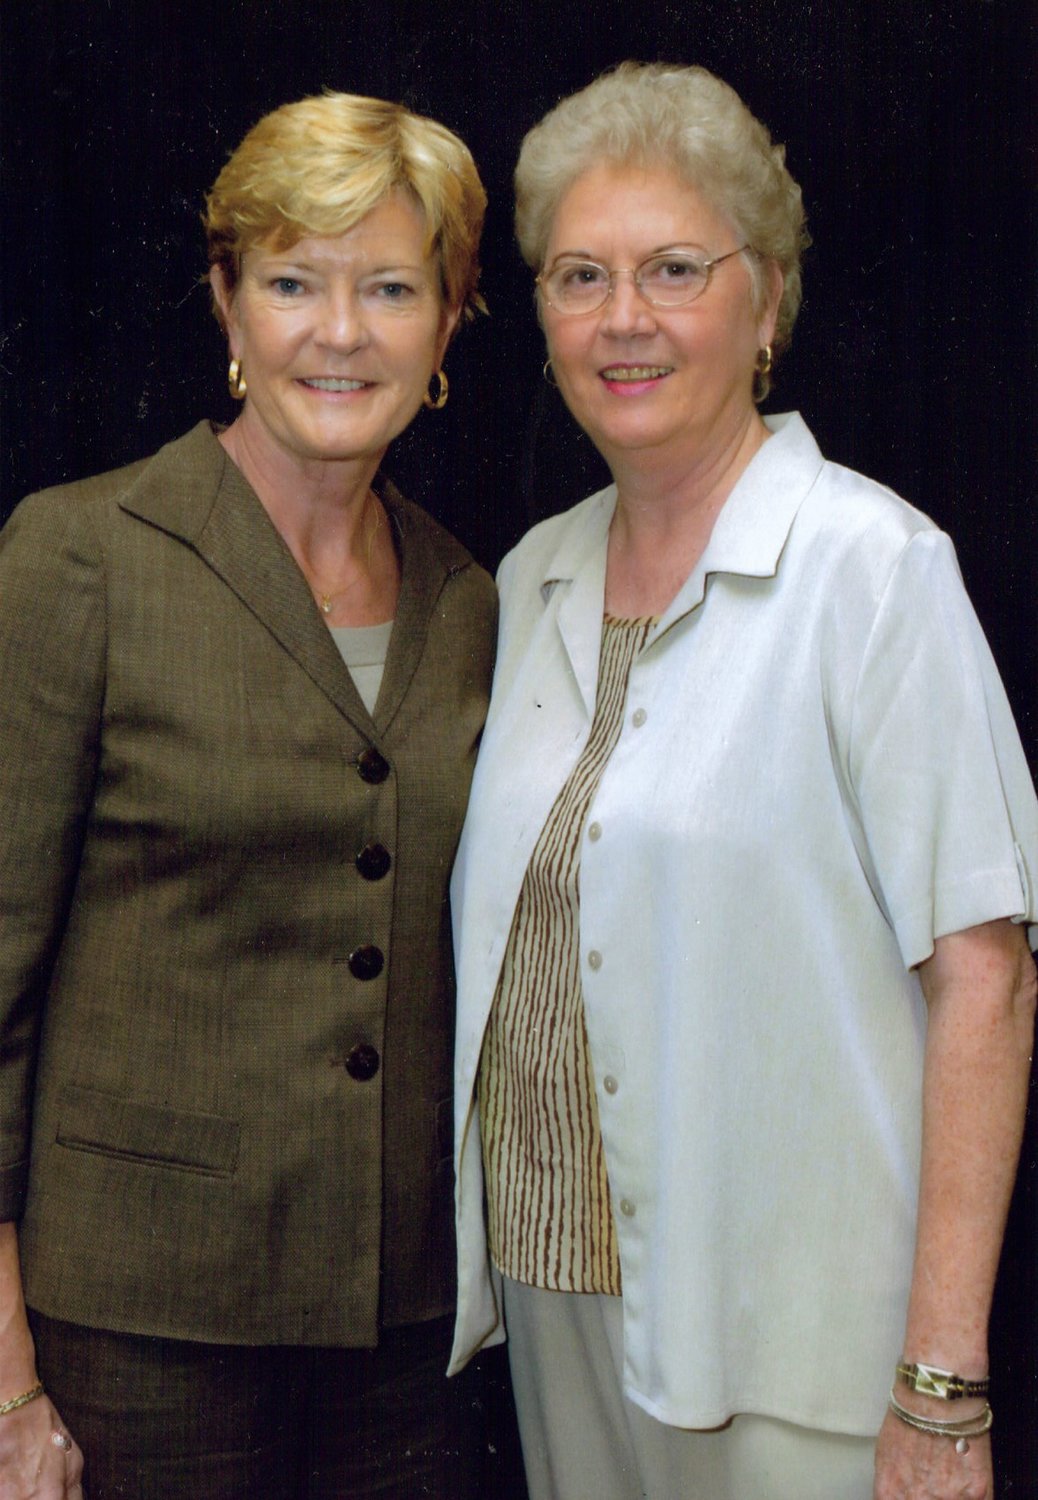 Tennessee coach Pat Summitt attended one of the basketball camps Wiseman established for girls before the two later became peers and friends. (Photo courtesy Belmont Athletics)